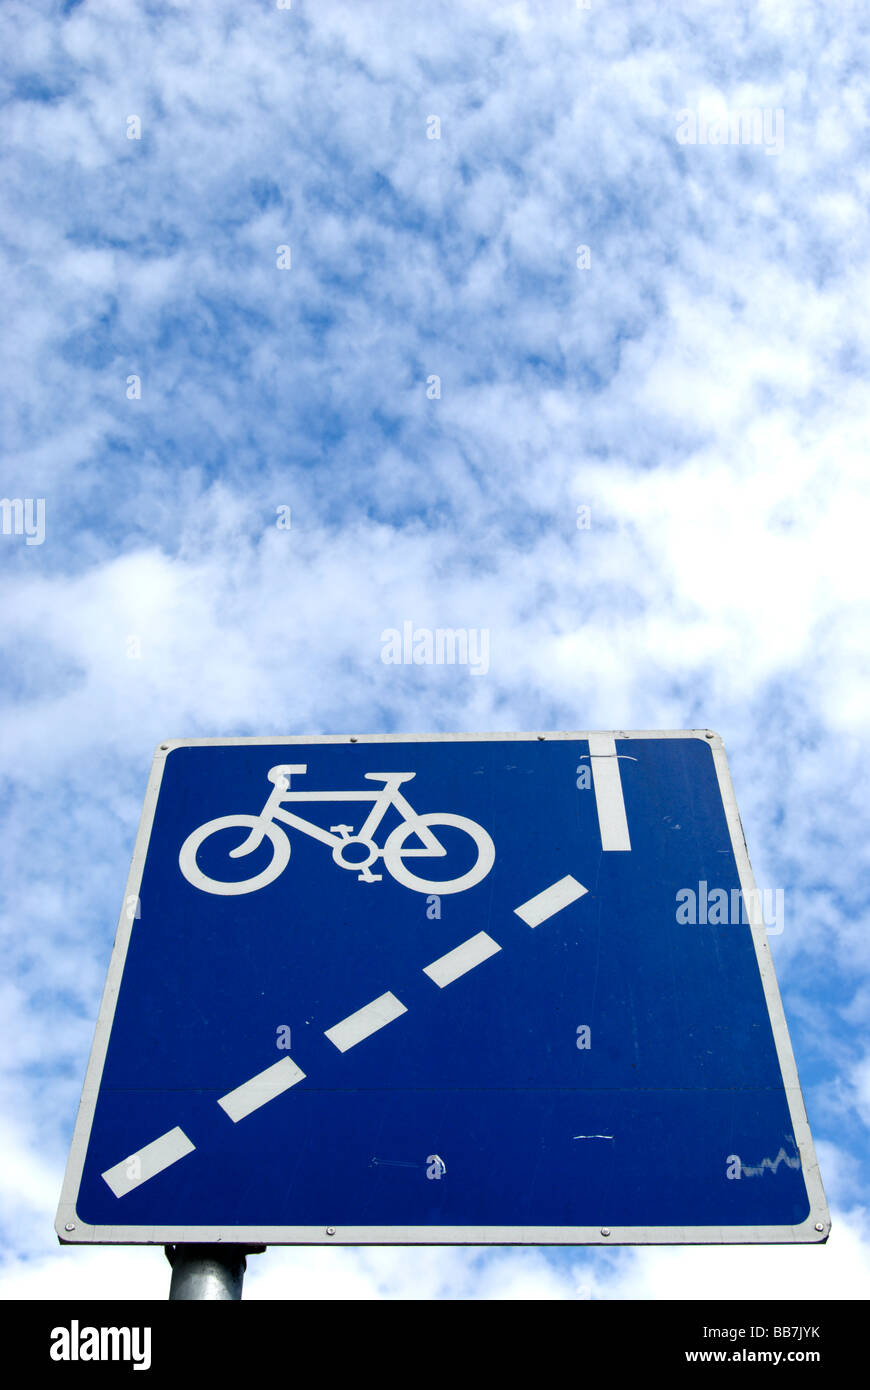 seen under a mottled sky of patch work cirrocumulus cloud british blue and white road sign indicating mandatory cycle lane ahead Stock Photo